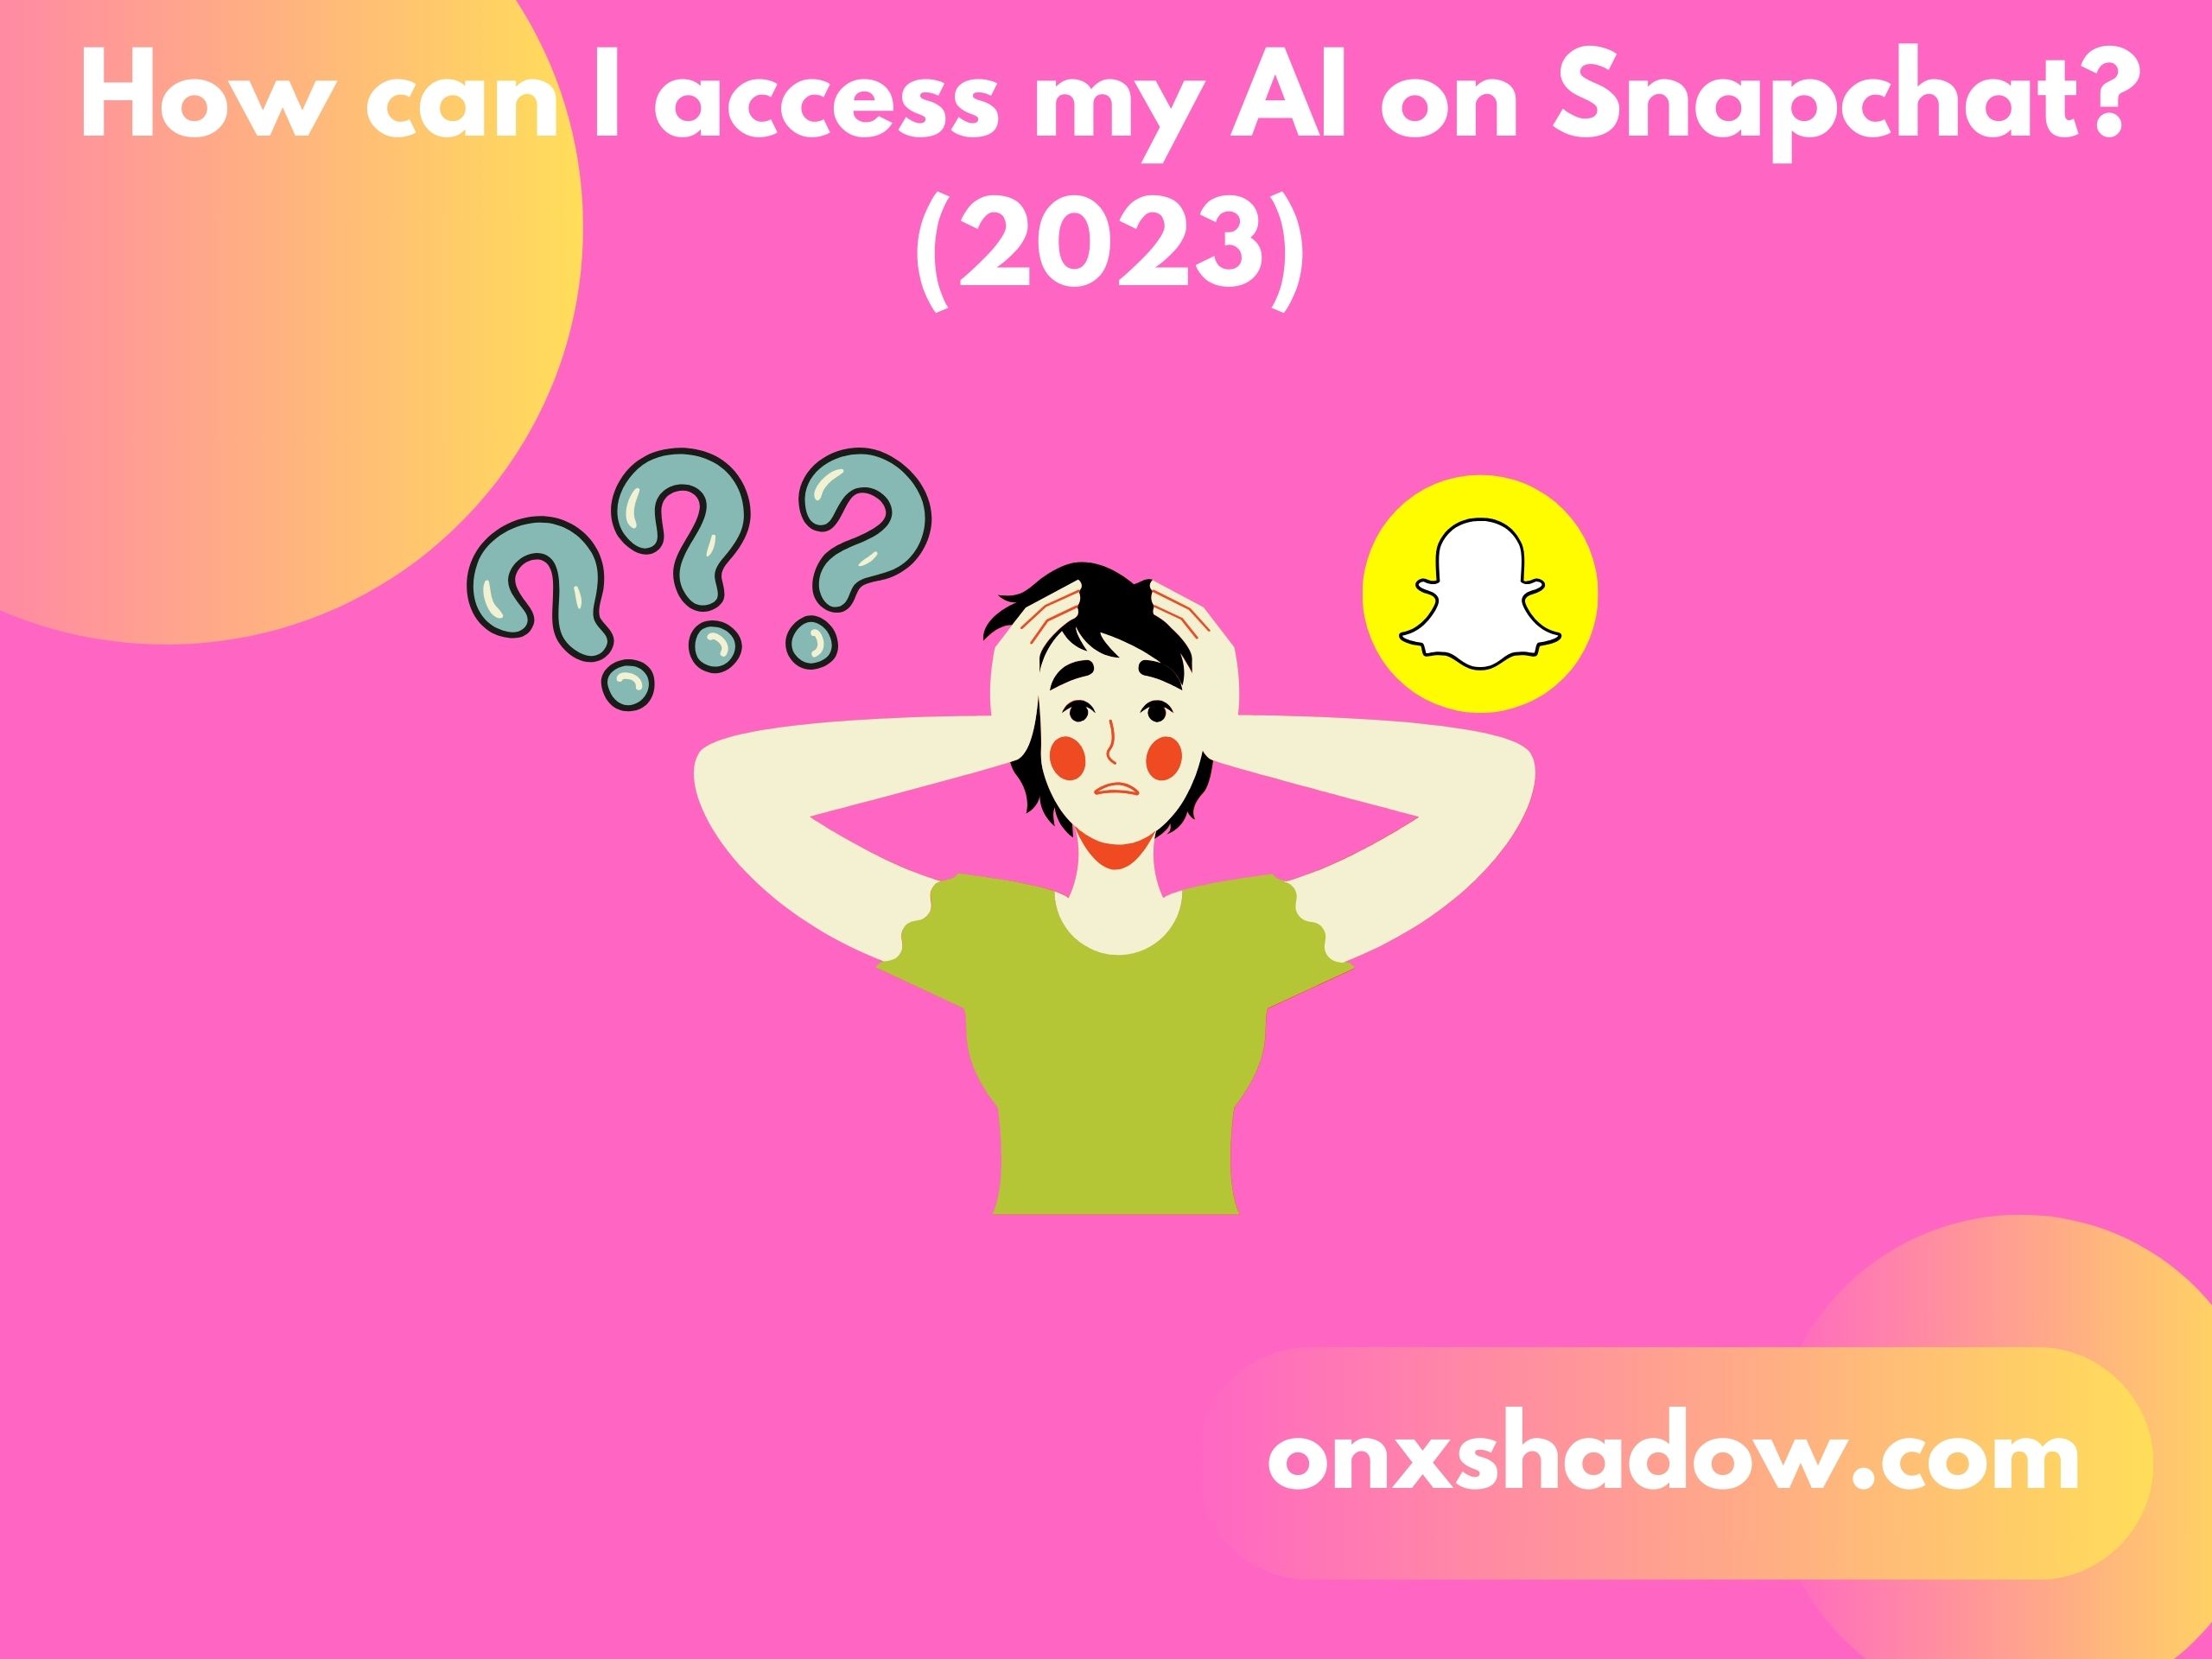 How can I access my AI on Snapchat? (2023)